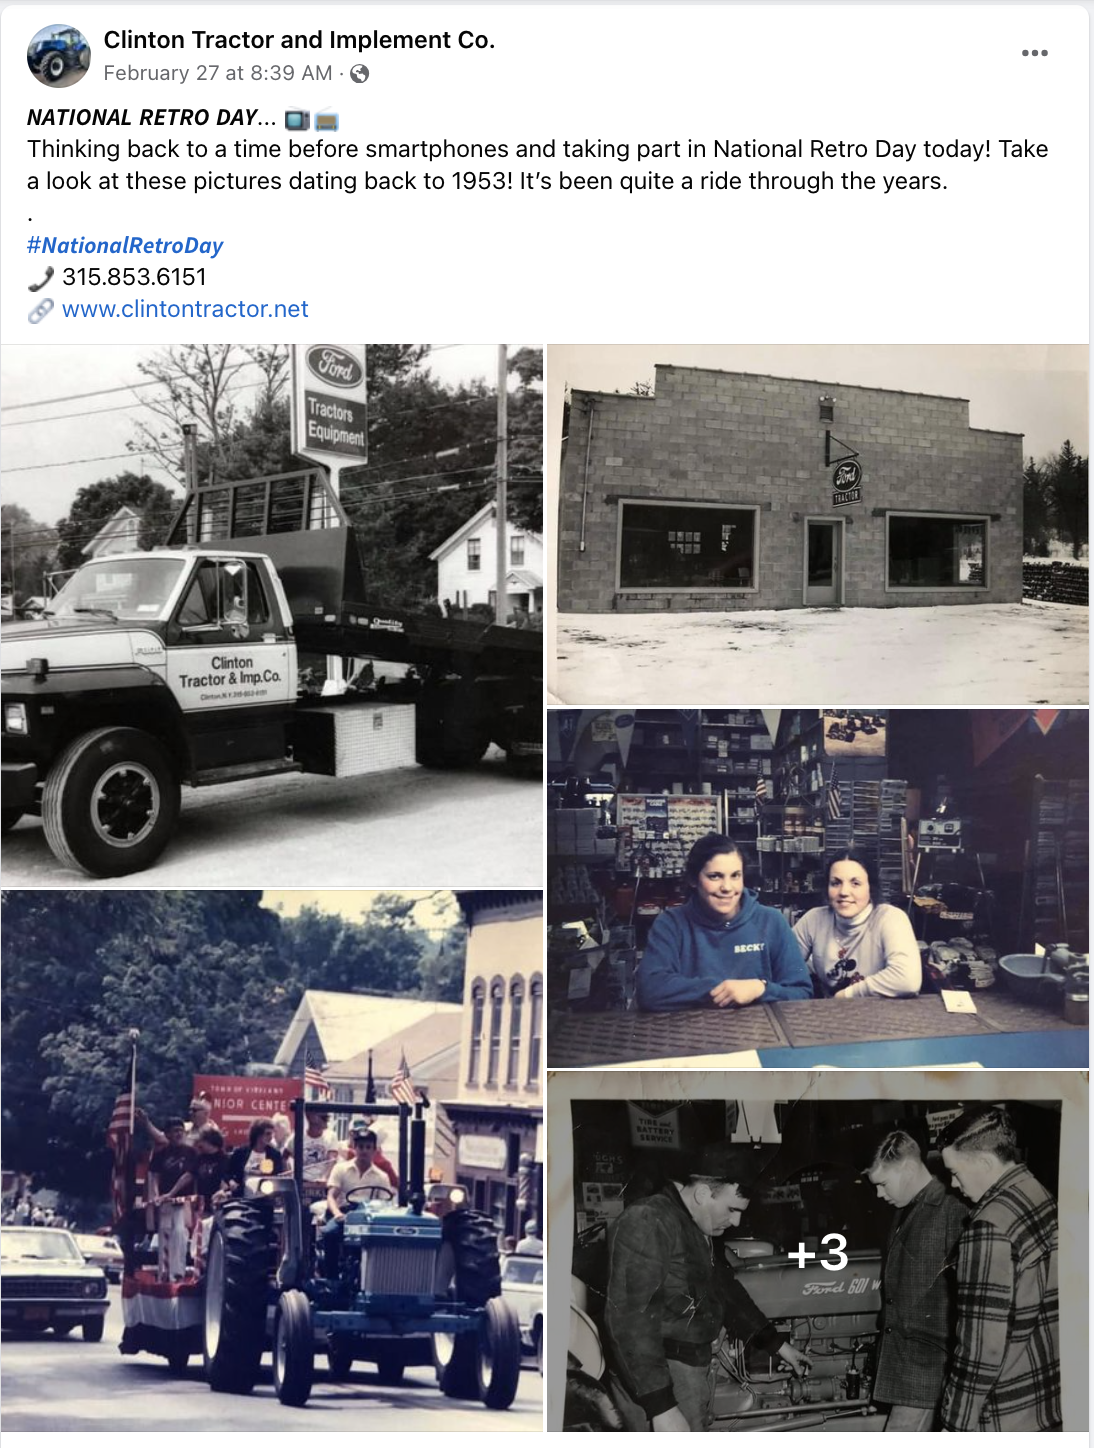 Clinton Tractor and Implement National Retro Day Facebook post